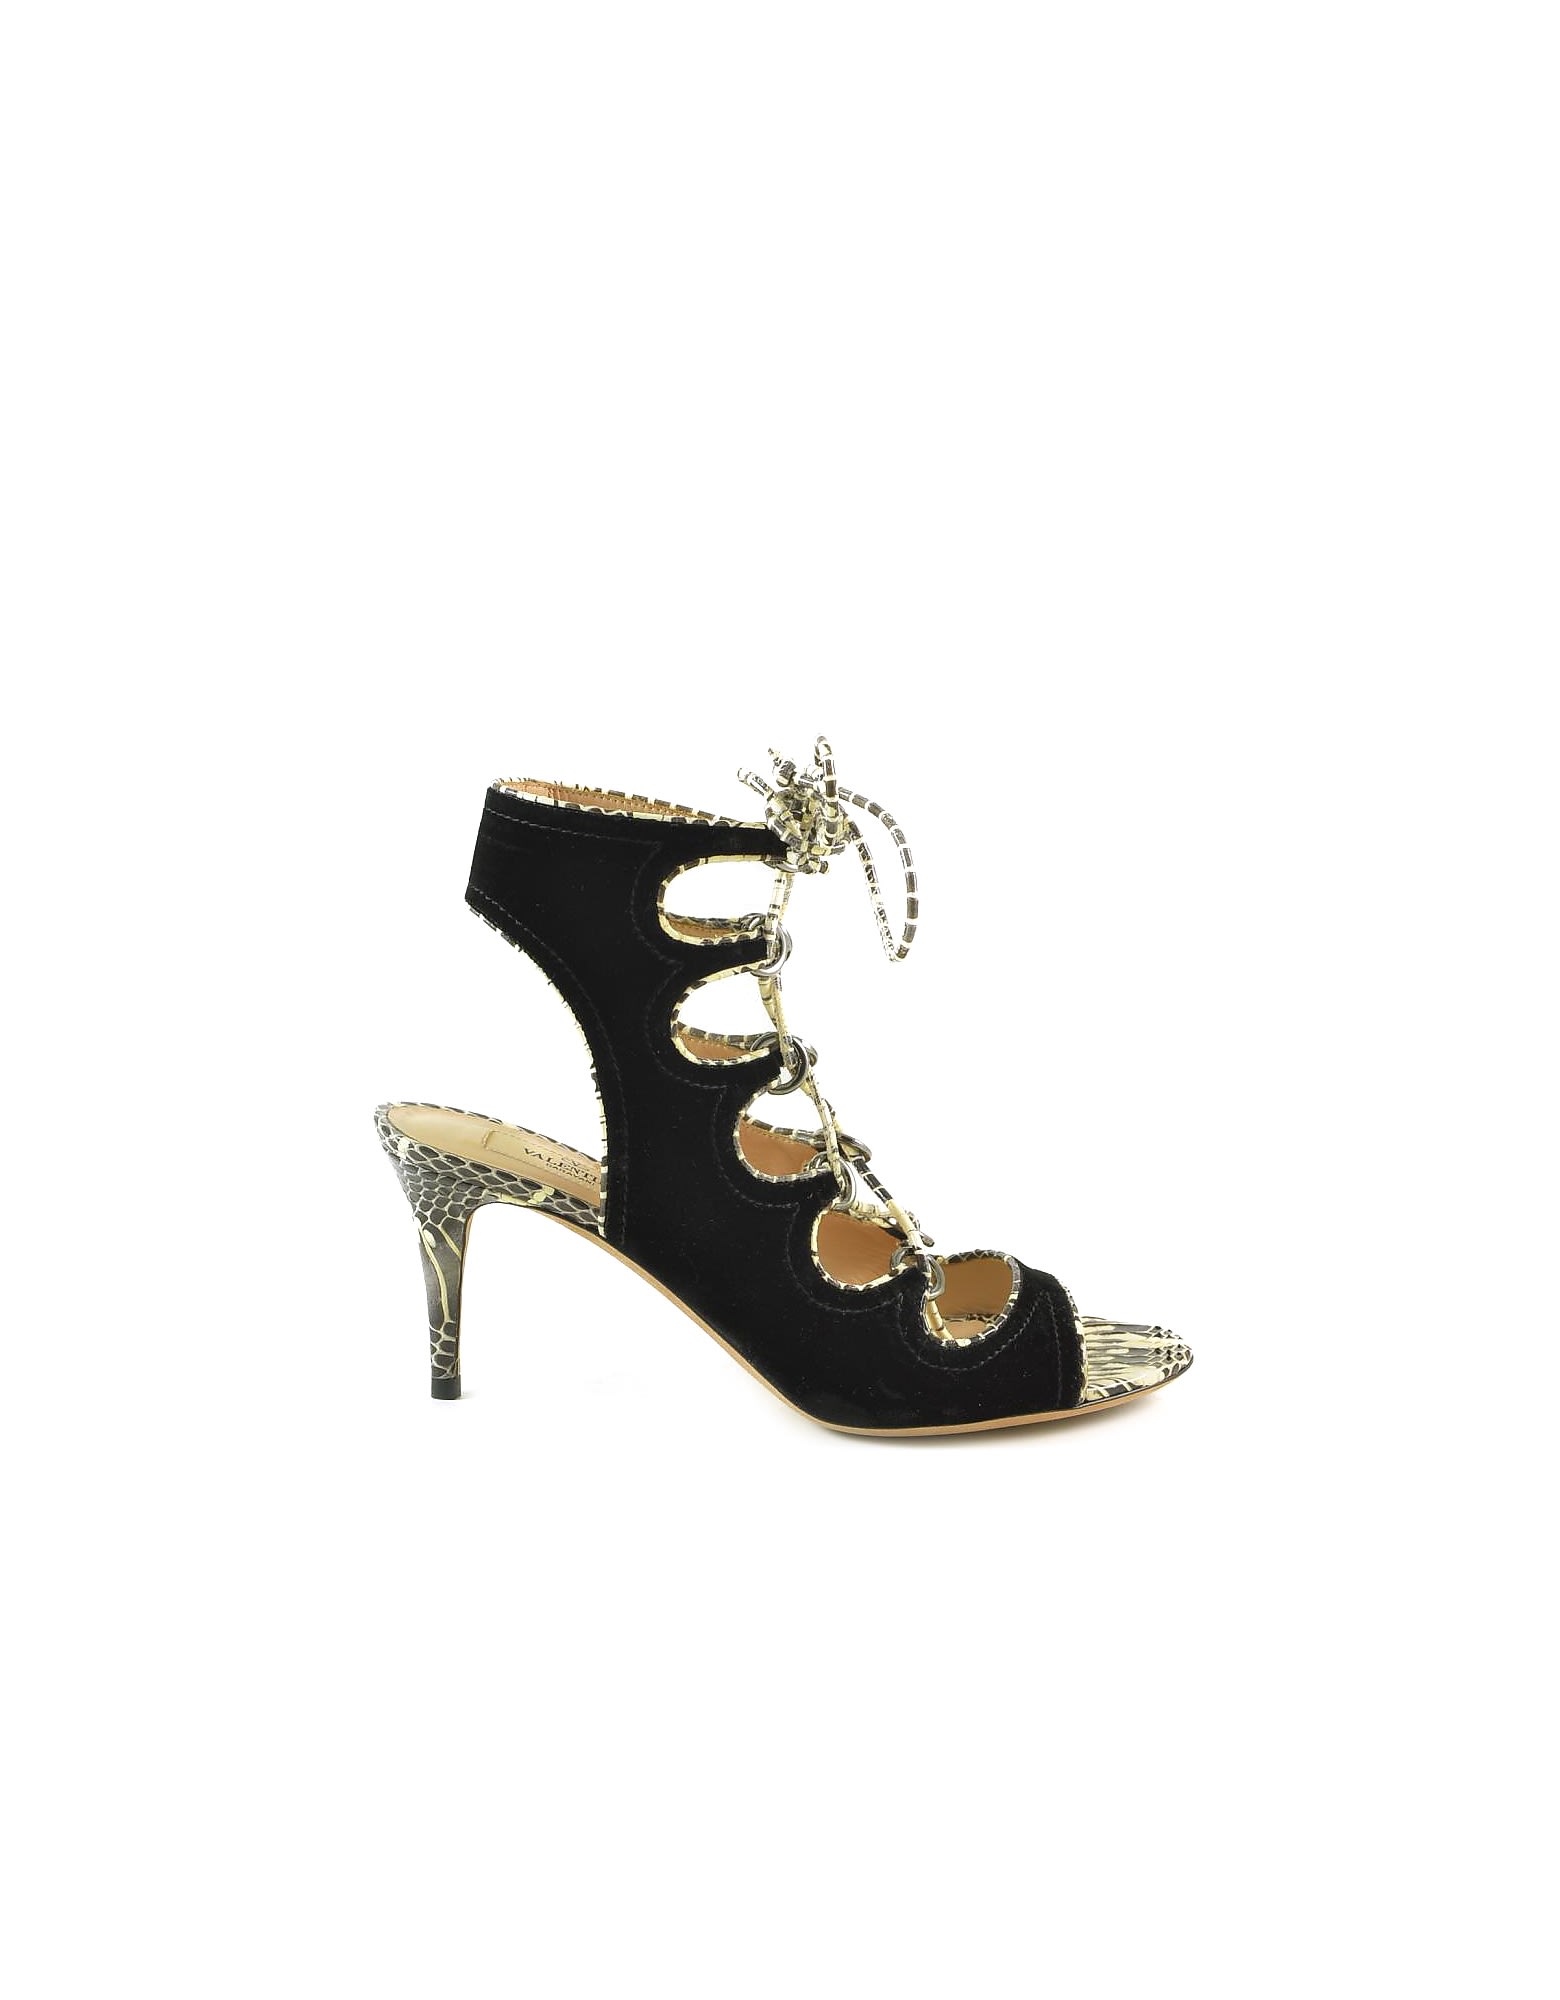 Valentino Black Suede And Stone Snake Print Lace Up Sandals